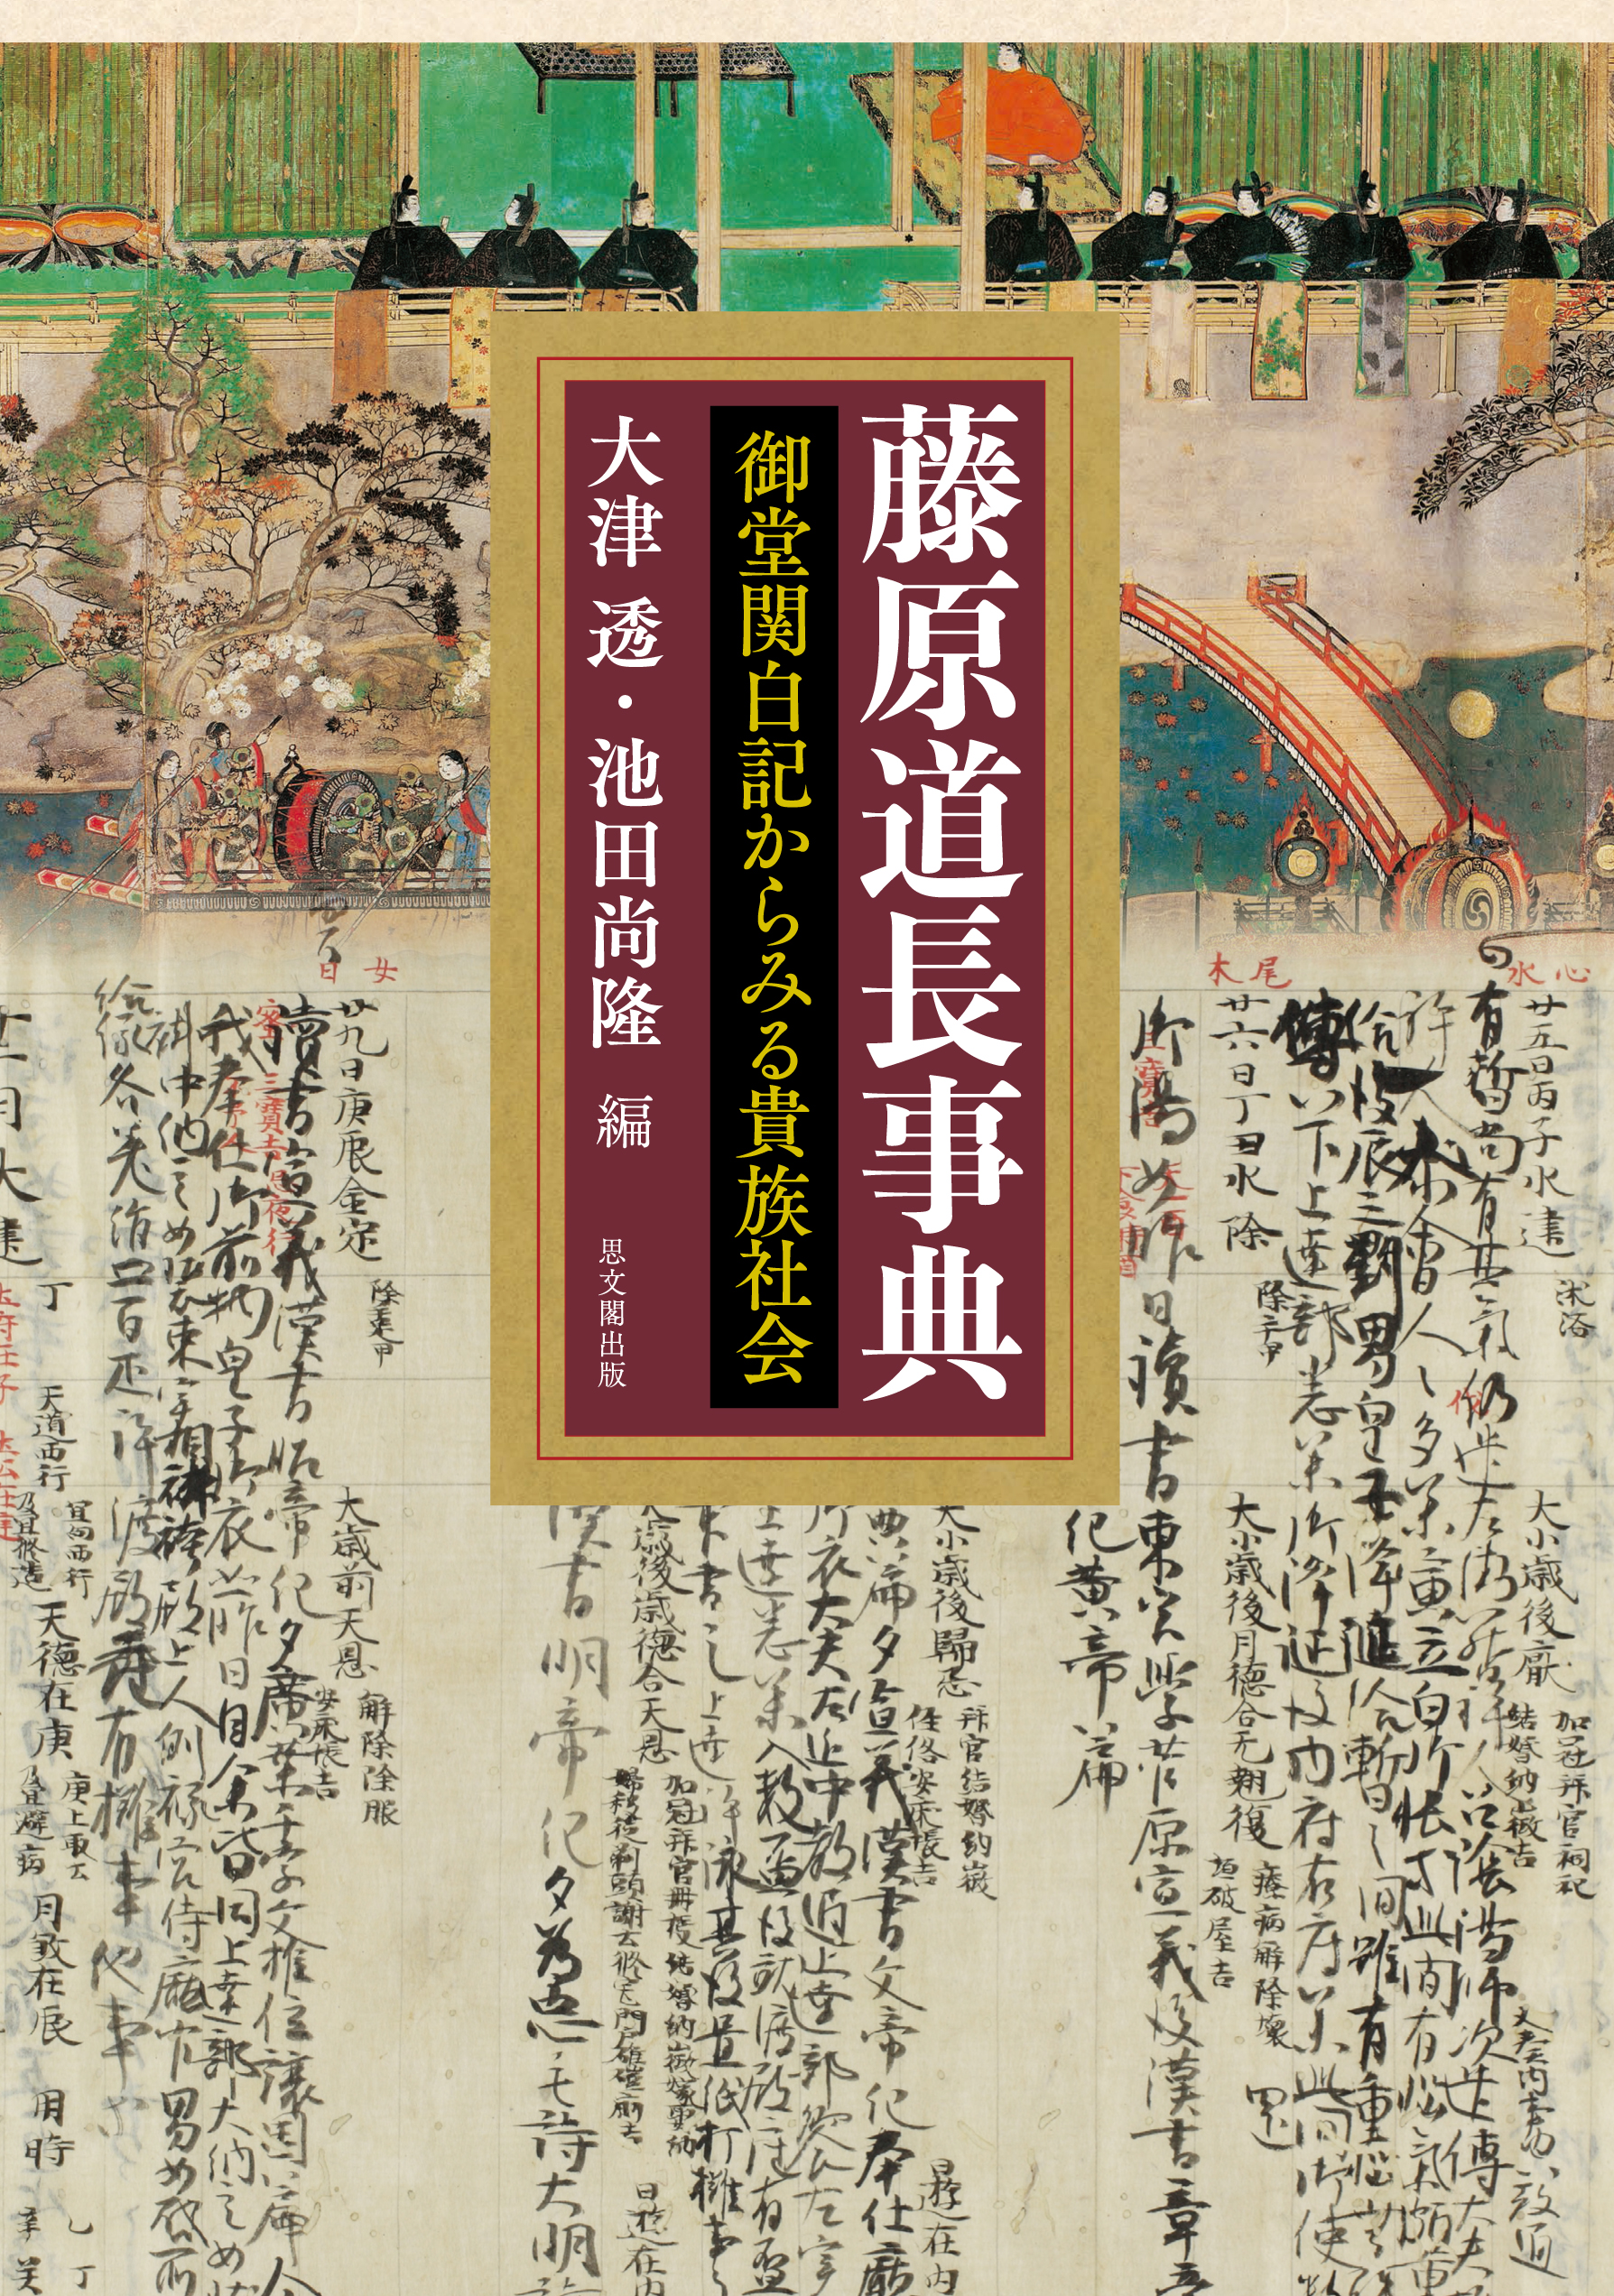 A cover with a picture of Michinaga’s diary